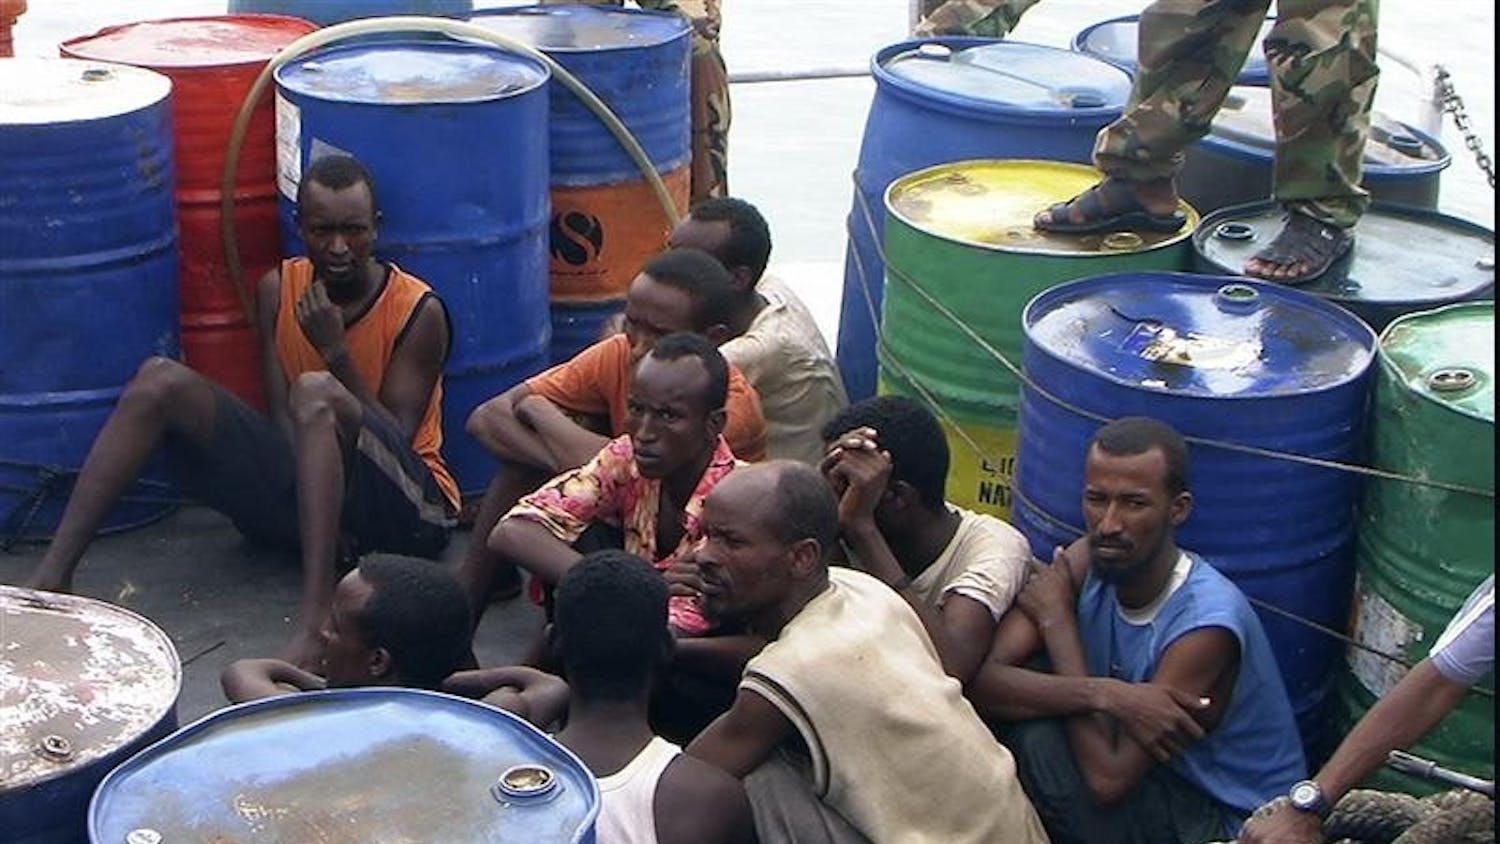 In this Nov. 21, 2008 file photo, Somali pirates held by Puntland police forces, sit in Bassaso, Somalia. They've been described as "noble heros" by sympathetic Somalis, denounced as criminals by critics. But the adjective most used to describe the men holding an American captain off the Horn of Africa is "pirate," a word that conjures images of sword-wielding swashbucklers romanticized by Hollywood. The 21st century reality of ragged Somali fishermen armed with rocket launchers, GPS systems and satellite phones, though, is a far cry from that.